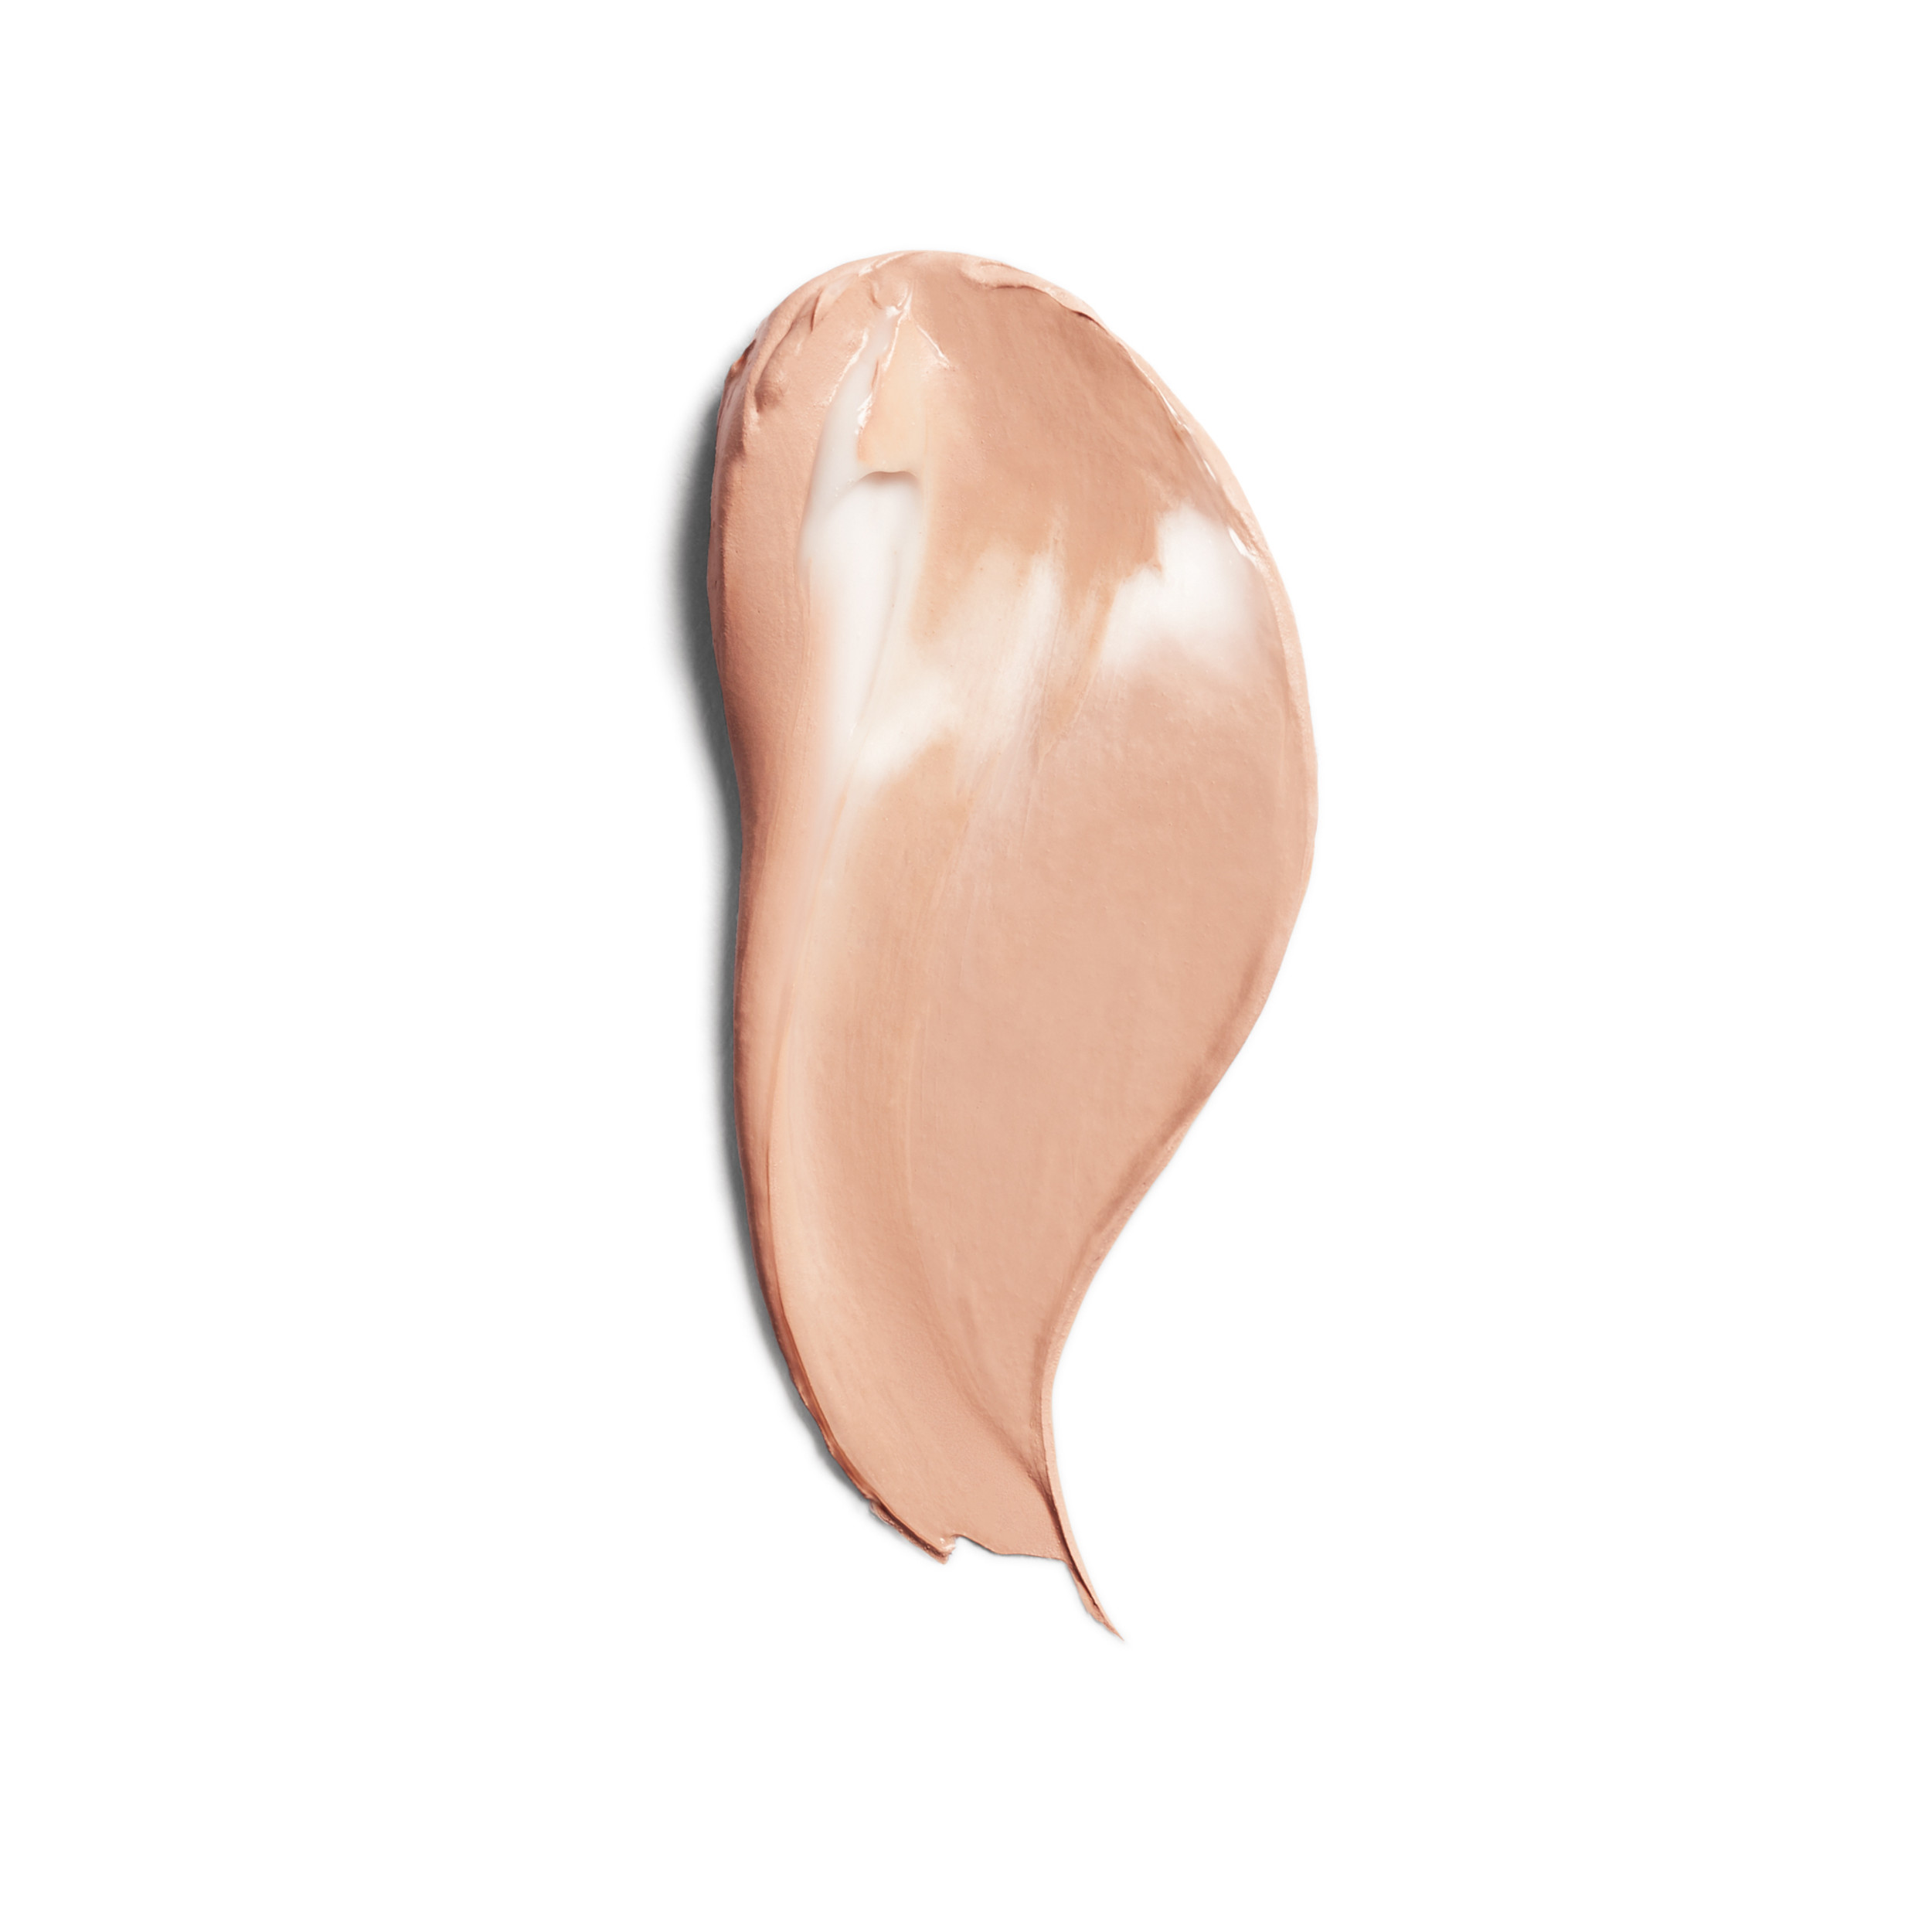 COVERGIRL + OLAY Simply Ageless Instant Wrinkle-Defying Foundation with SPF 28, Natural Ivory, 0.44 oz - image 3 of 9